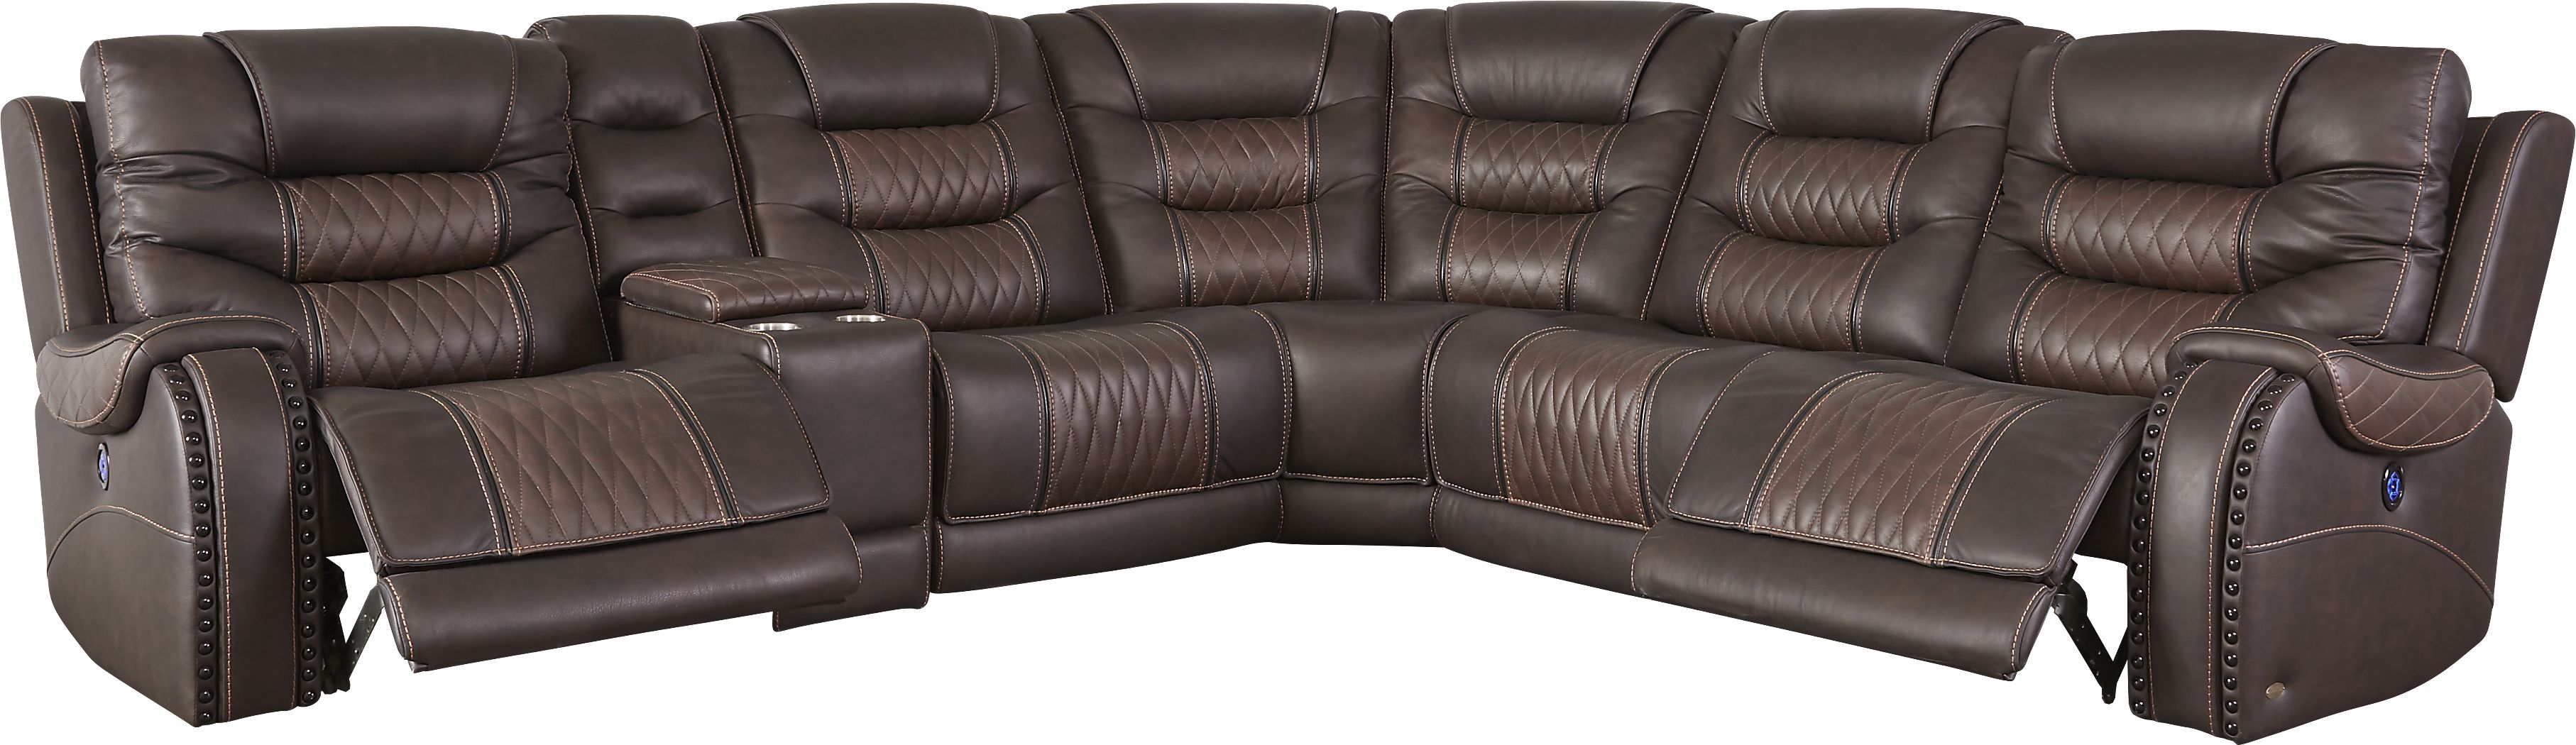 Eric Church Highway To Home Headliner Brown Leather 9 Pc Dual Power Reclining Sectional Living Room